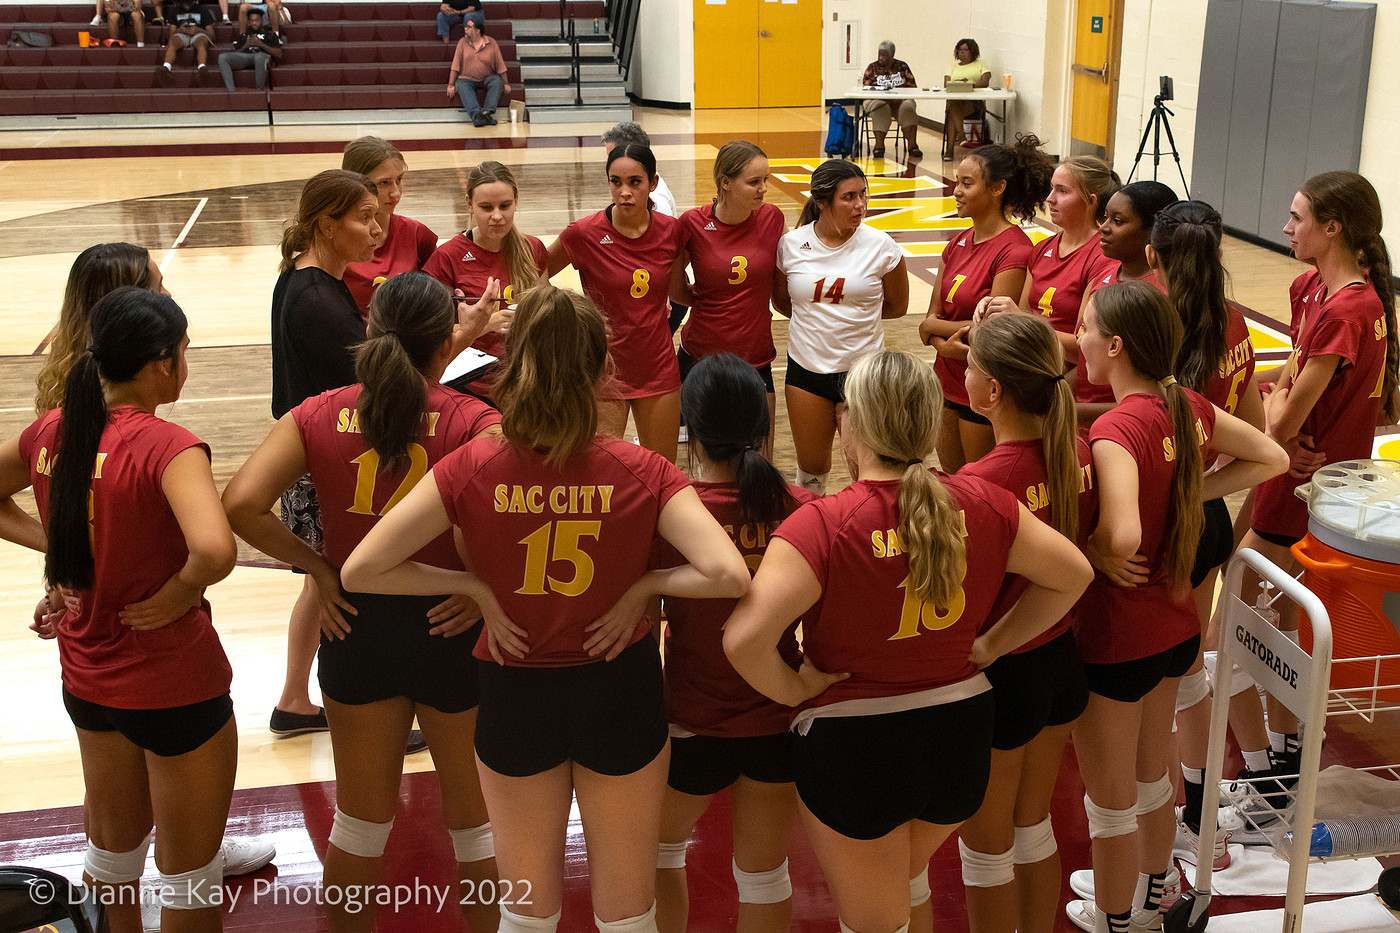 De Anza beats Sac City 3-1 (25-16, 14-25, 25-19, 26-24) in the Nor-Cal Regional Playoffs; Shackelford had 17 kills and 20 assists and Vasquez had 23 digs